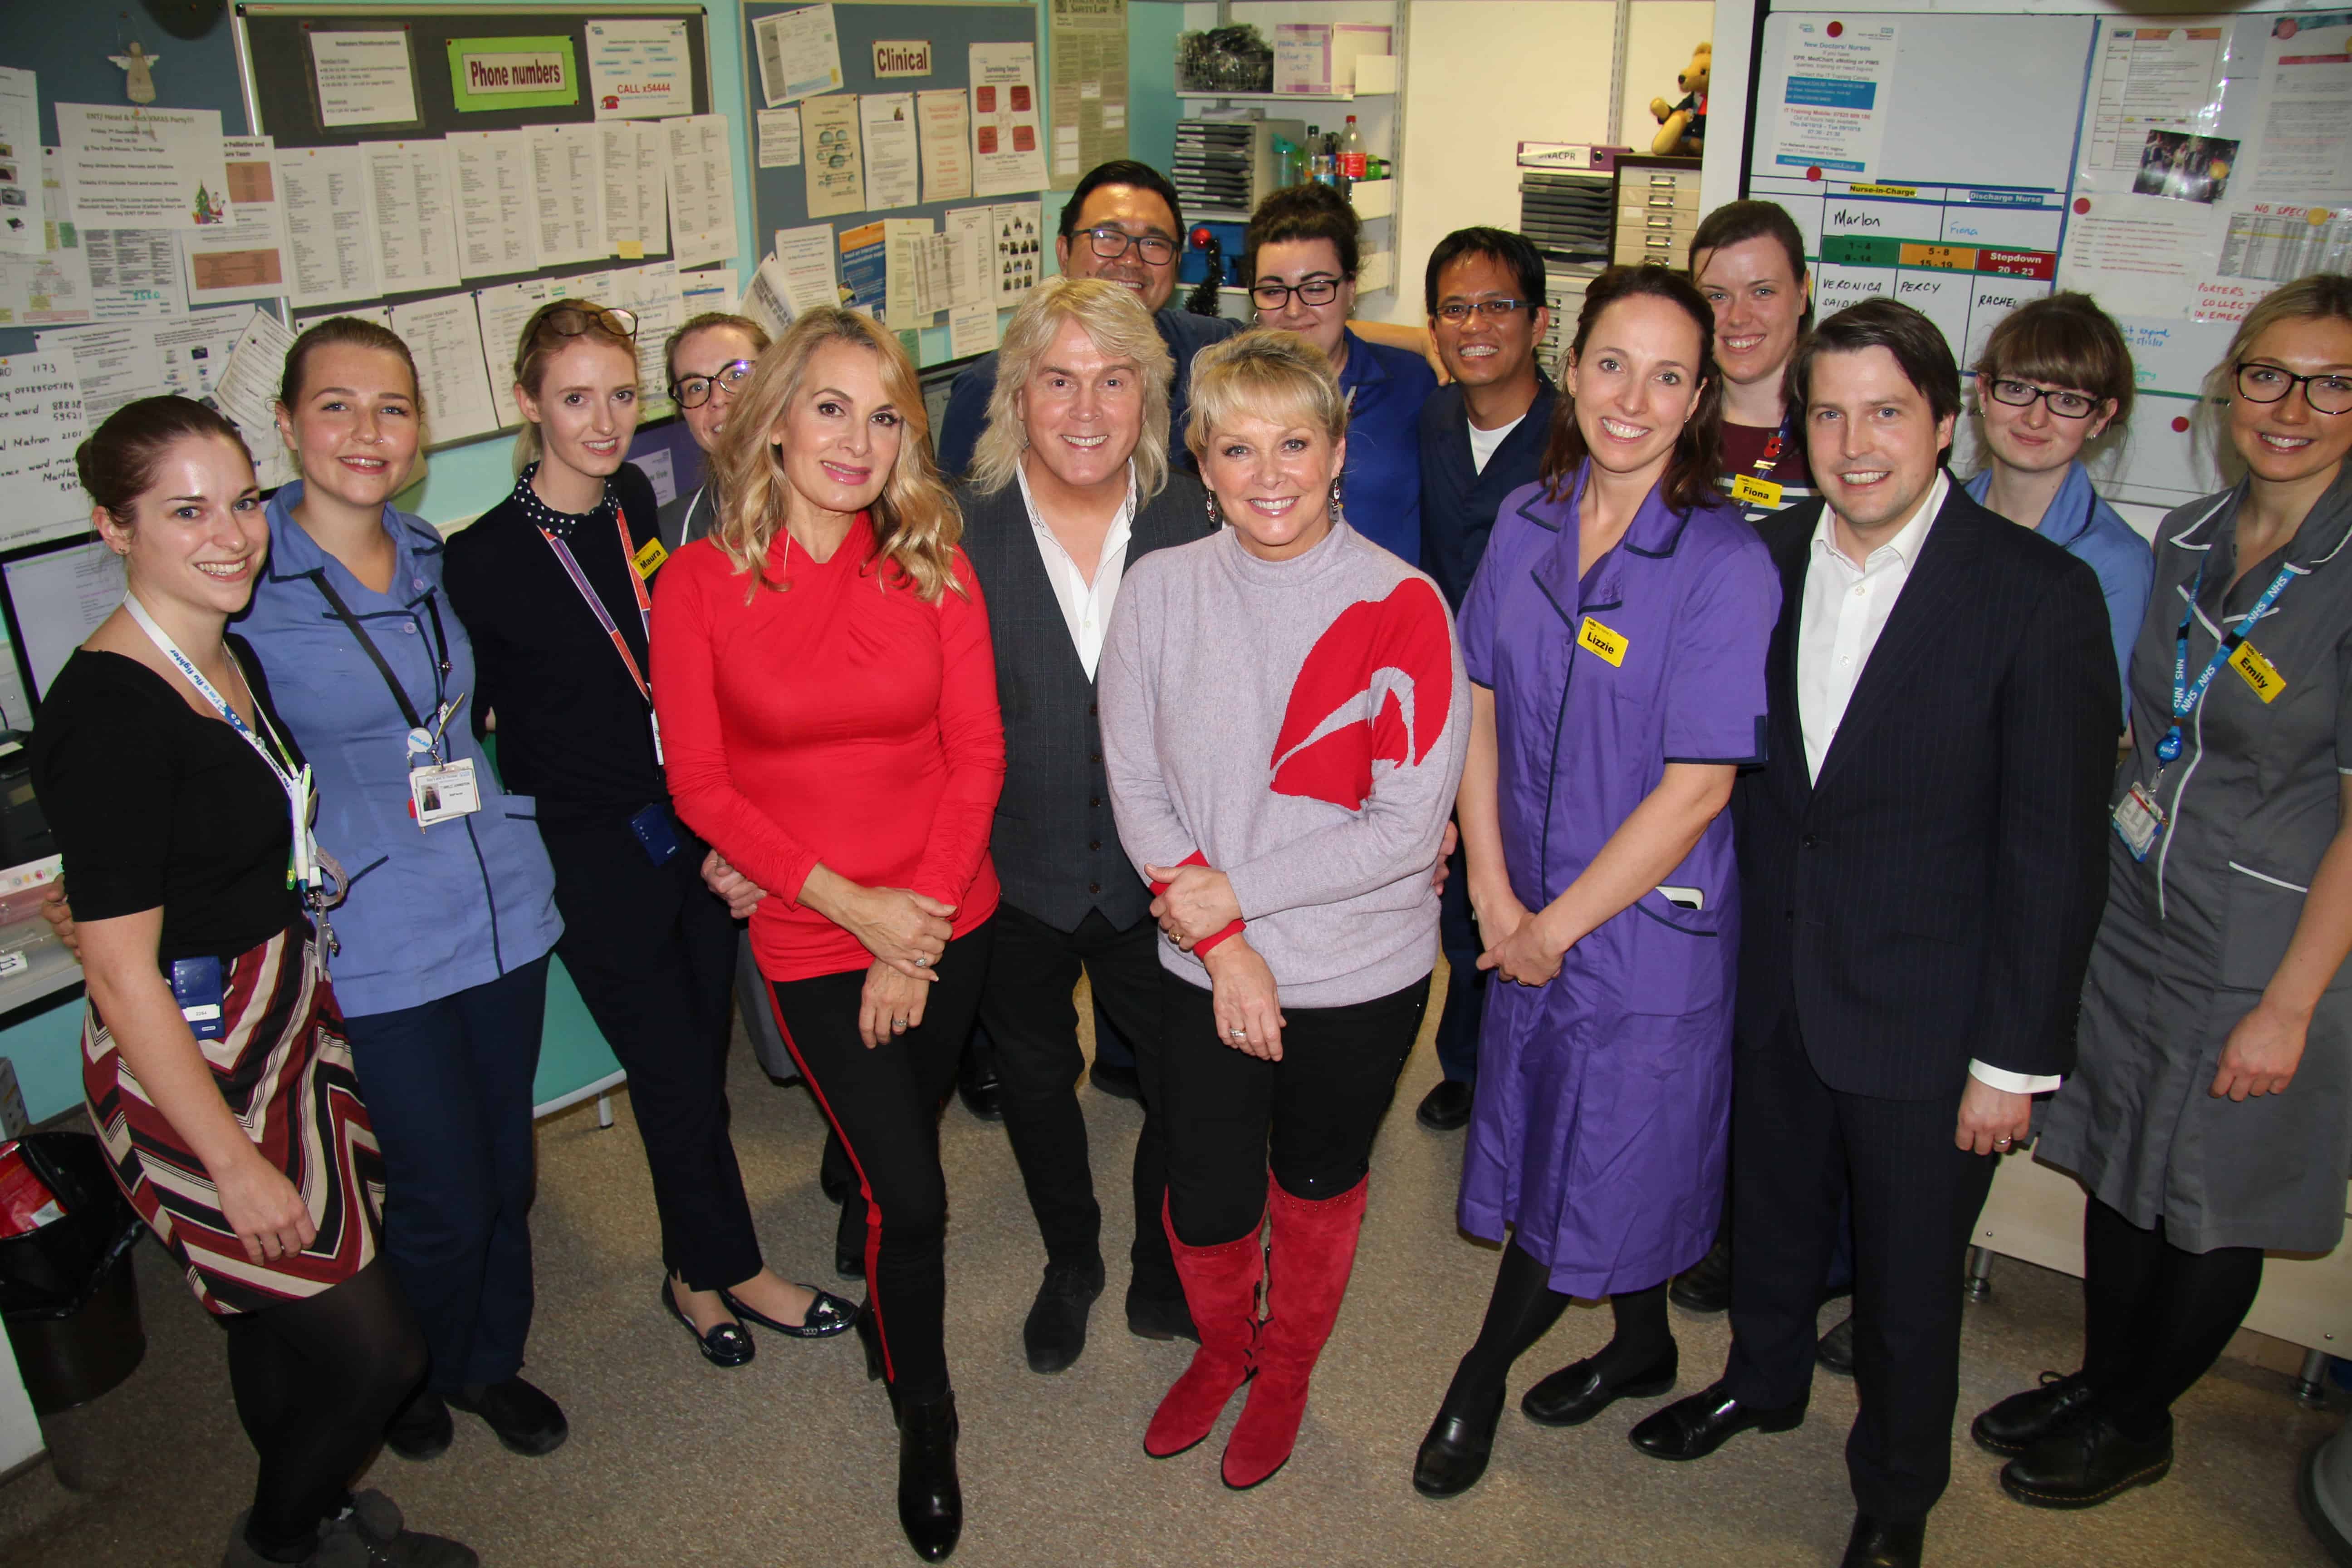 Singer Jay Aston returned to the ward where she was treated to thank hard-working Guy's staff